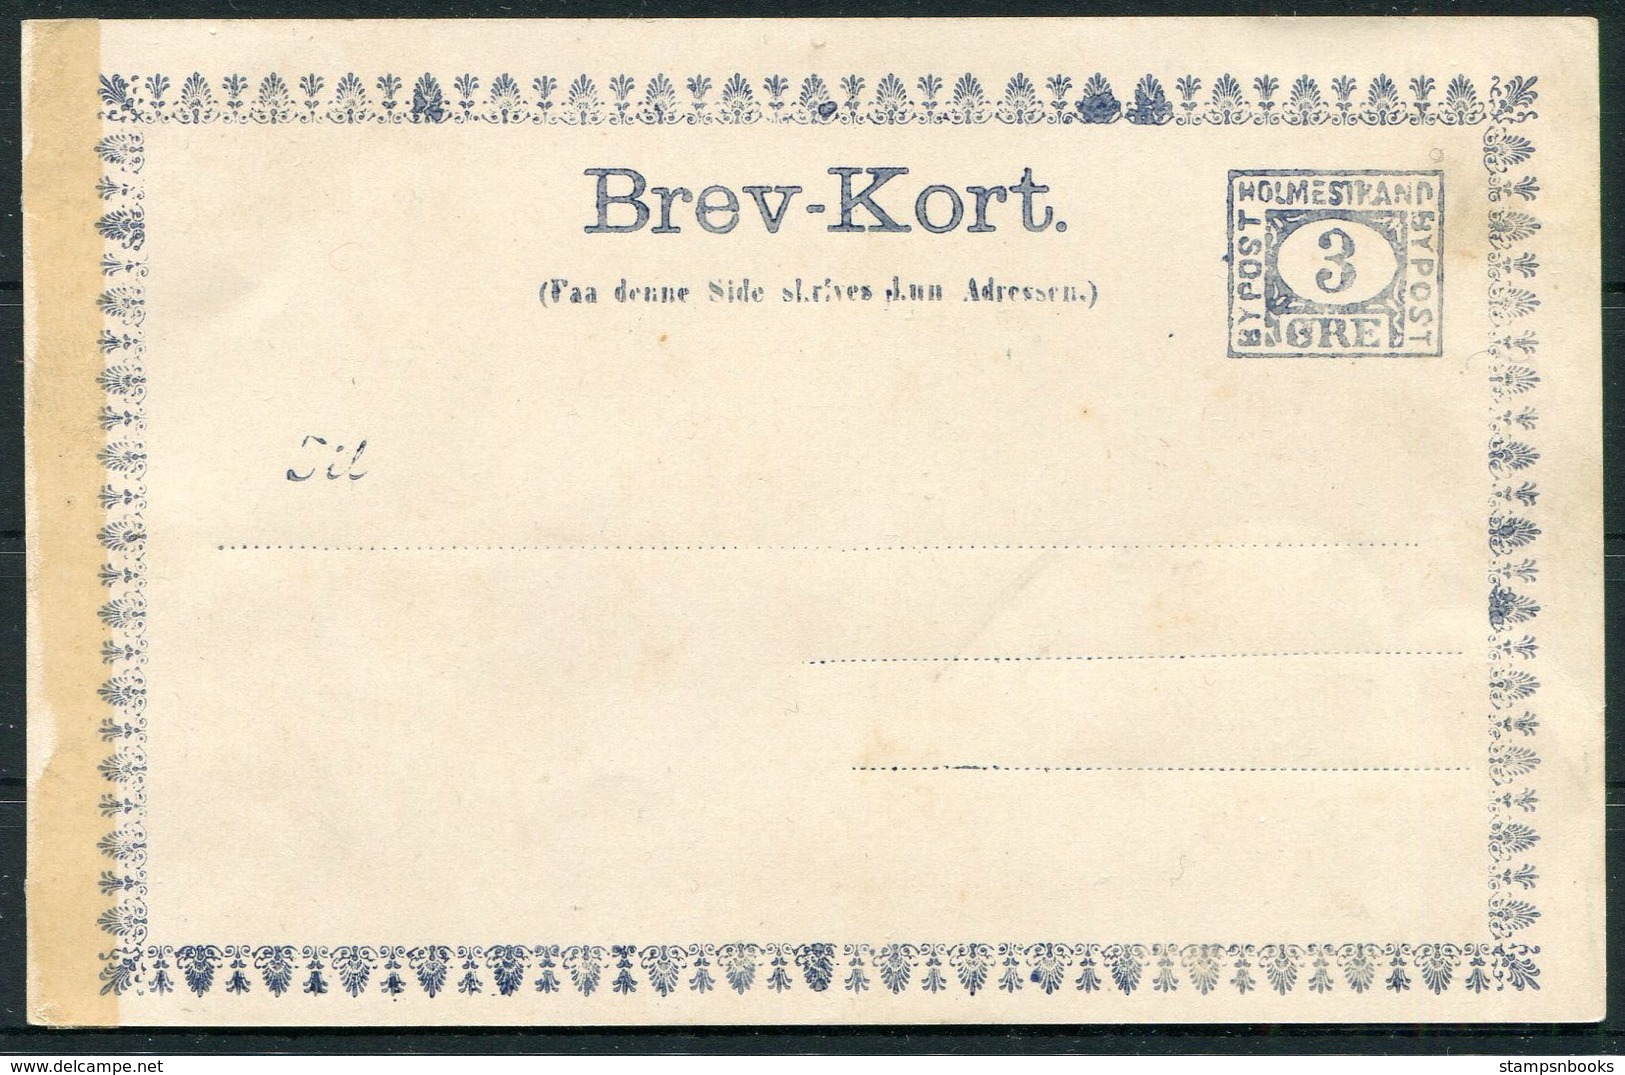 Norway Holmestrand Local Post 3 Ore Brev-kort Stationery Postcard - Local Post Stamps